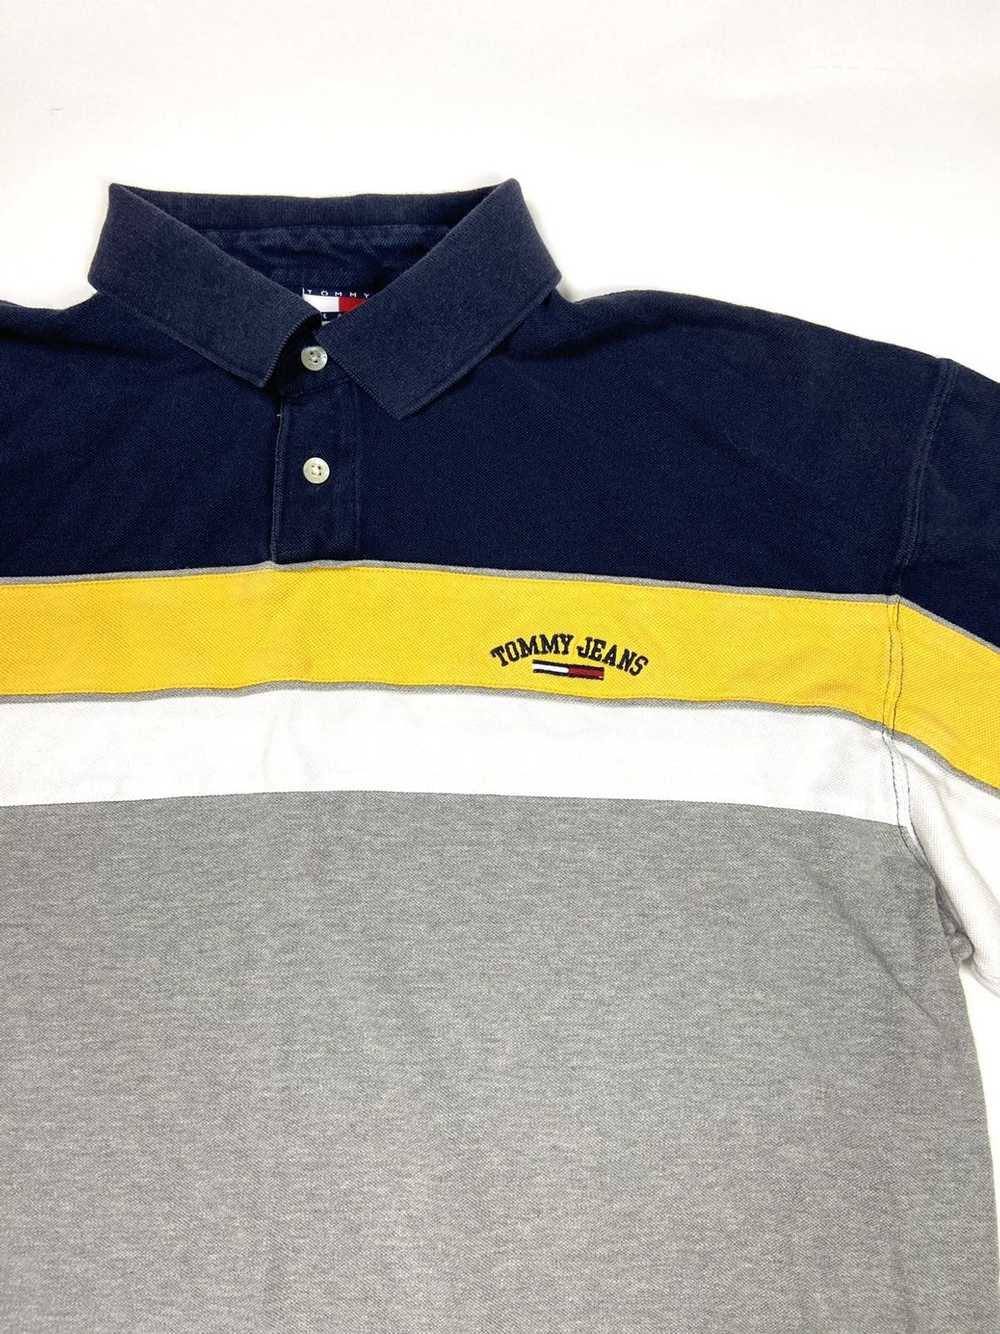 Tommy Jeans Vintage Tommy Jeans Polo Shirt - image 2